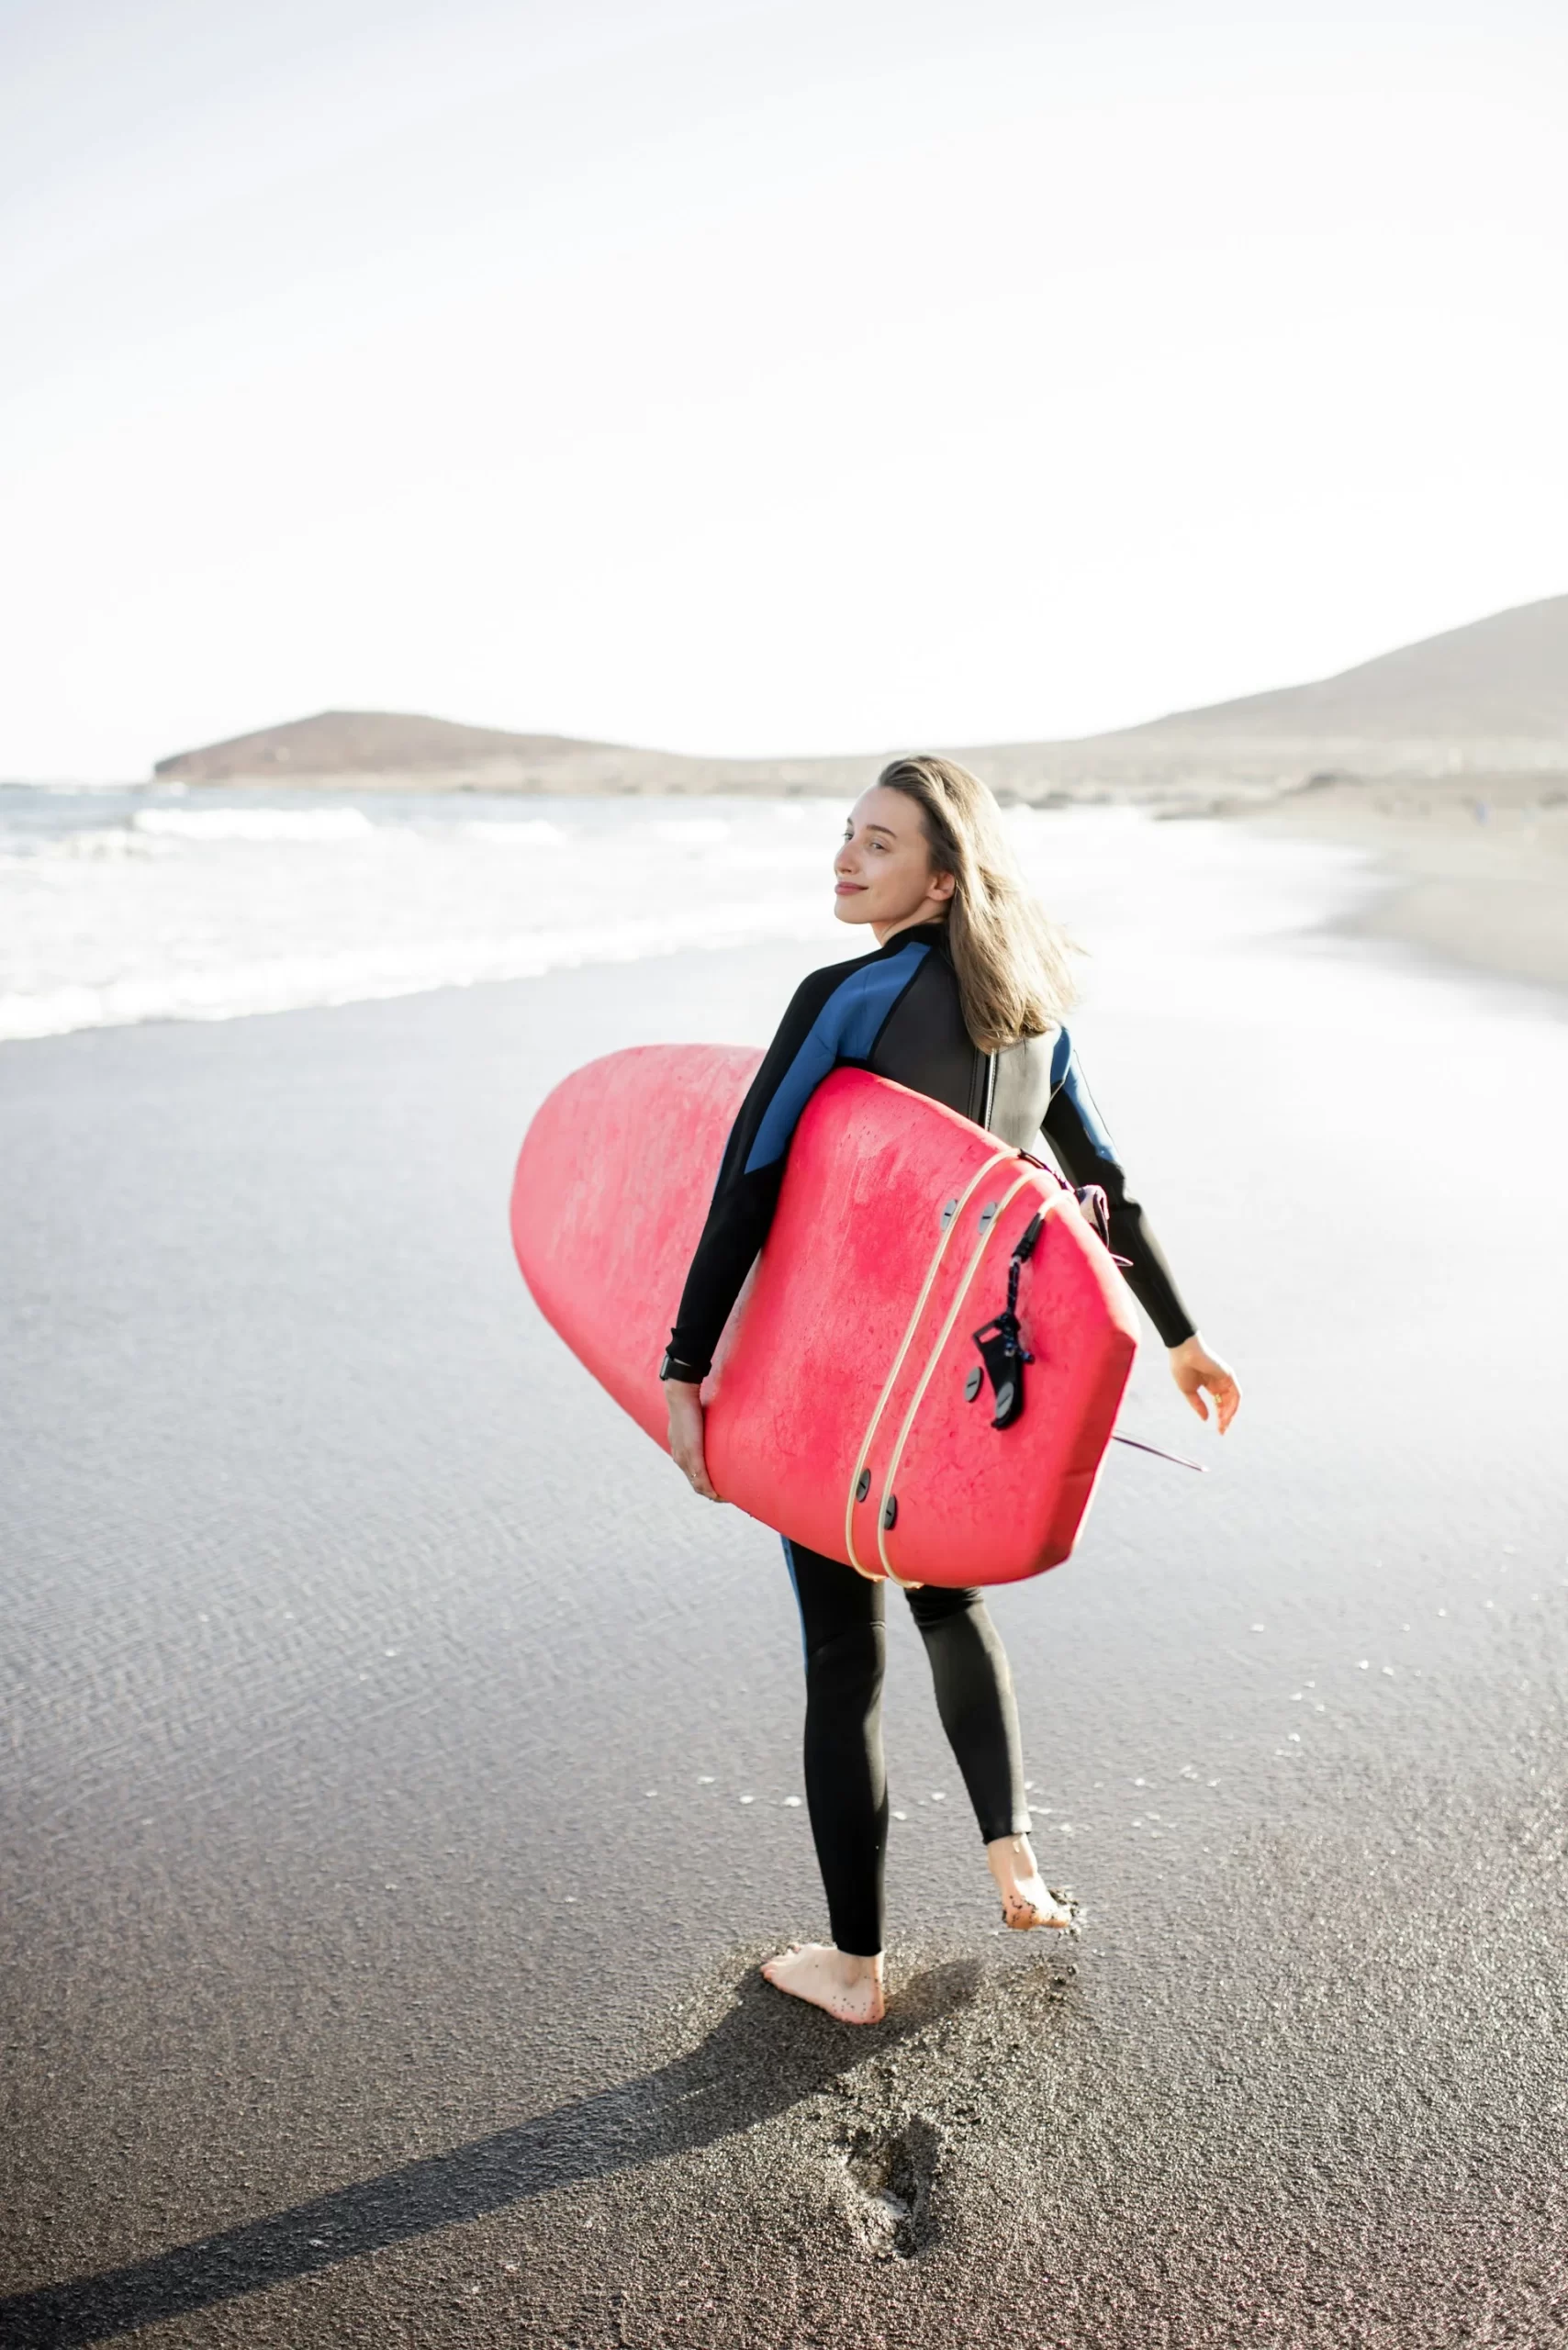 photo - a woman wearing a surf hydrosuit walking down a sandy beach with a waikiki rental surf board in her hand